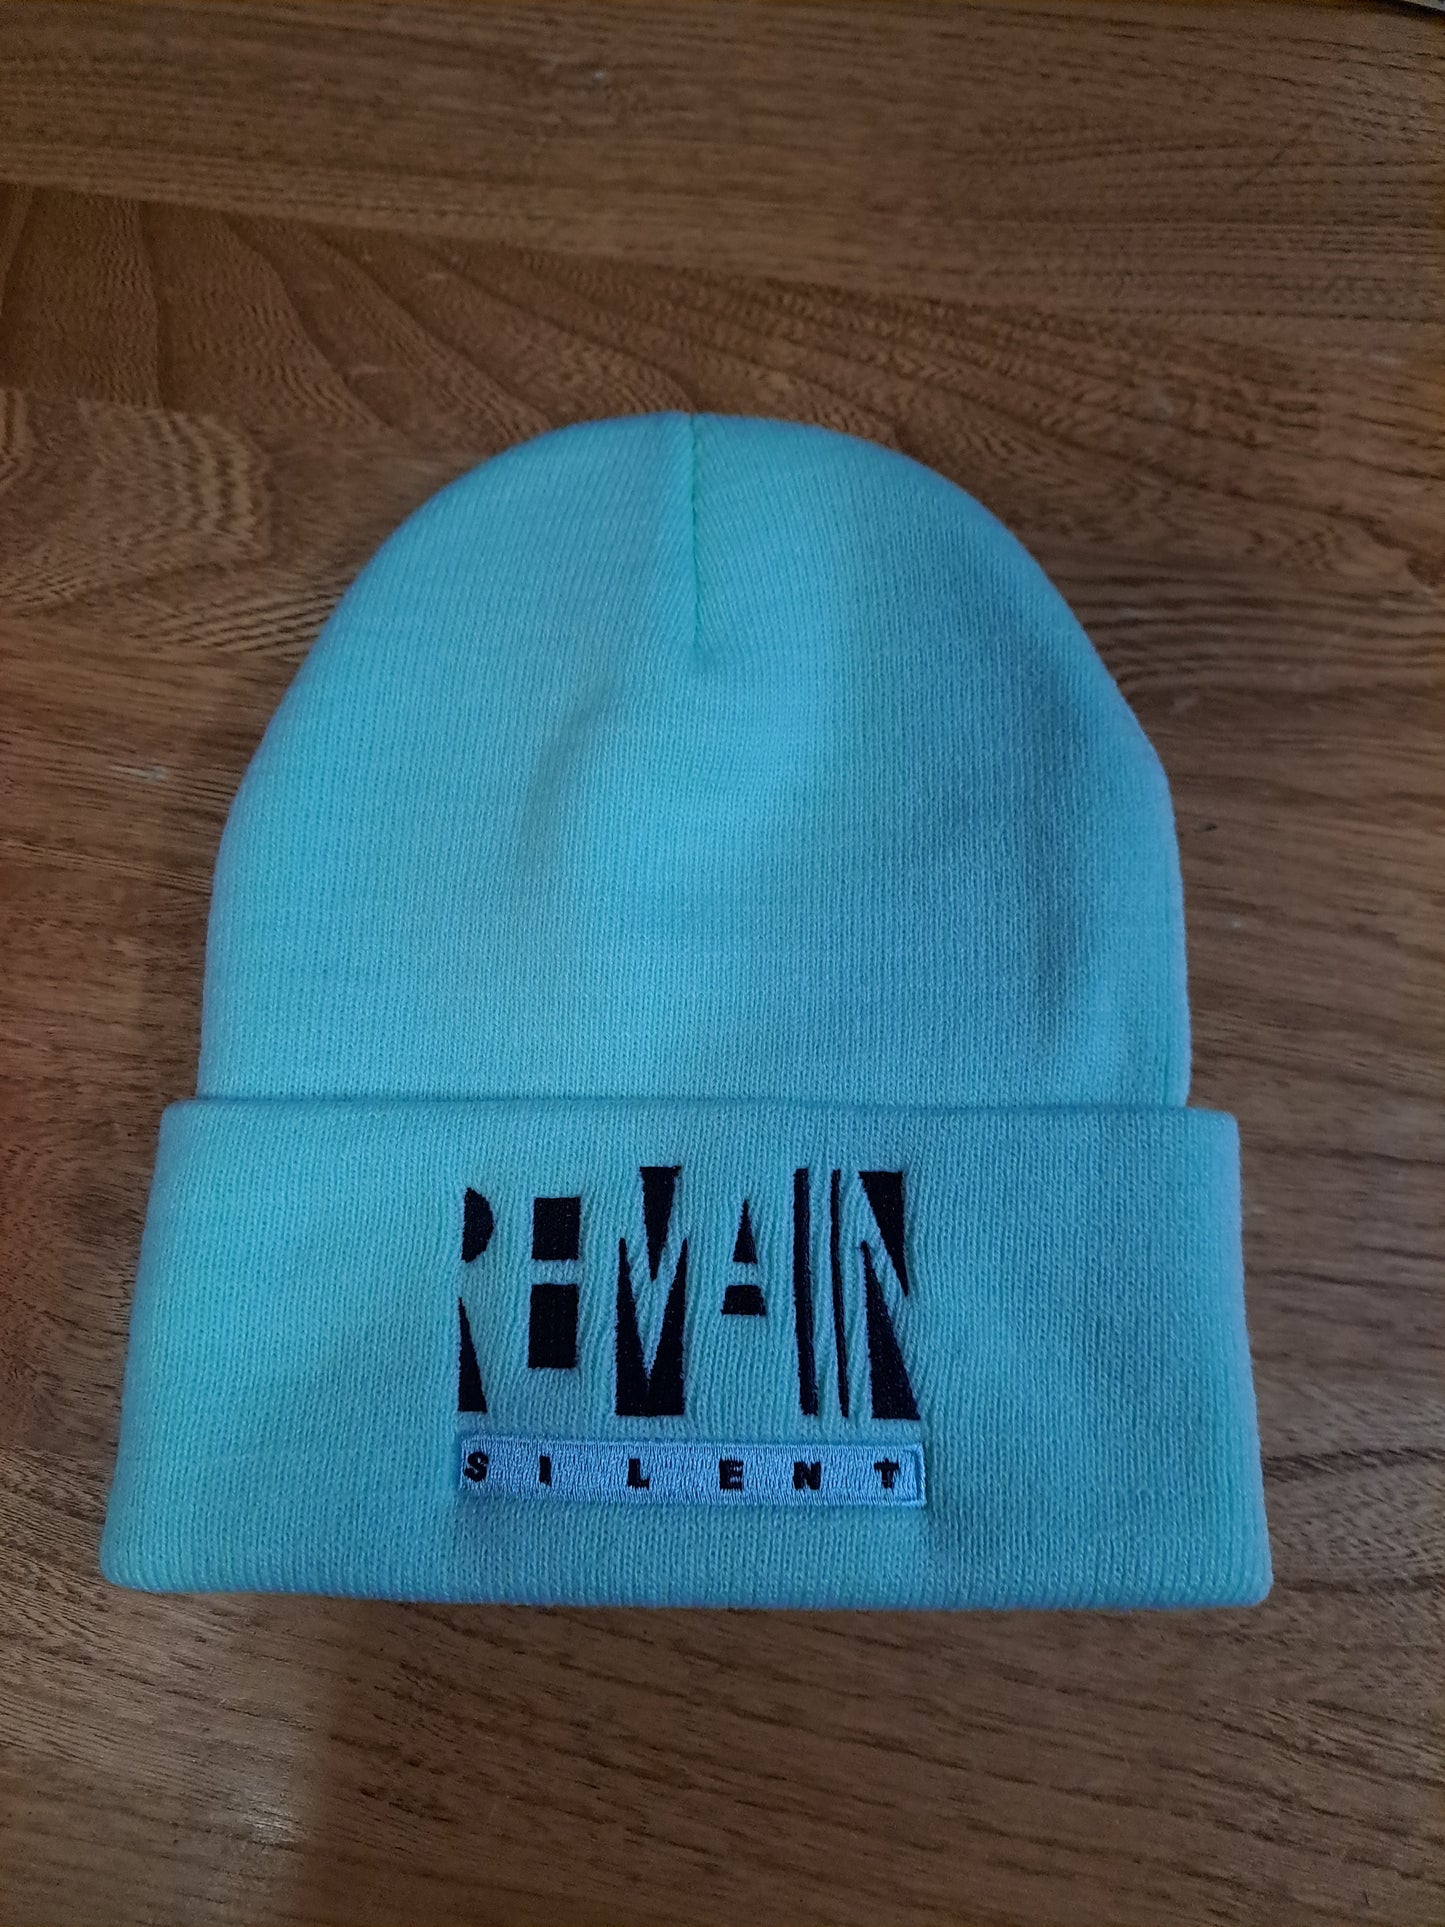 Remain Silent Embroidered Fold Over Stocking Caps